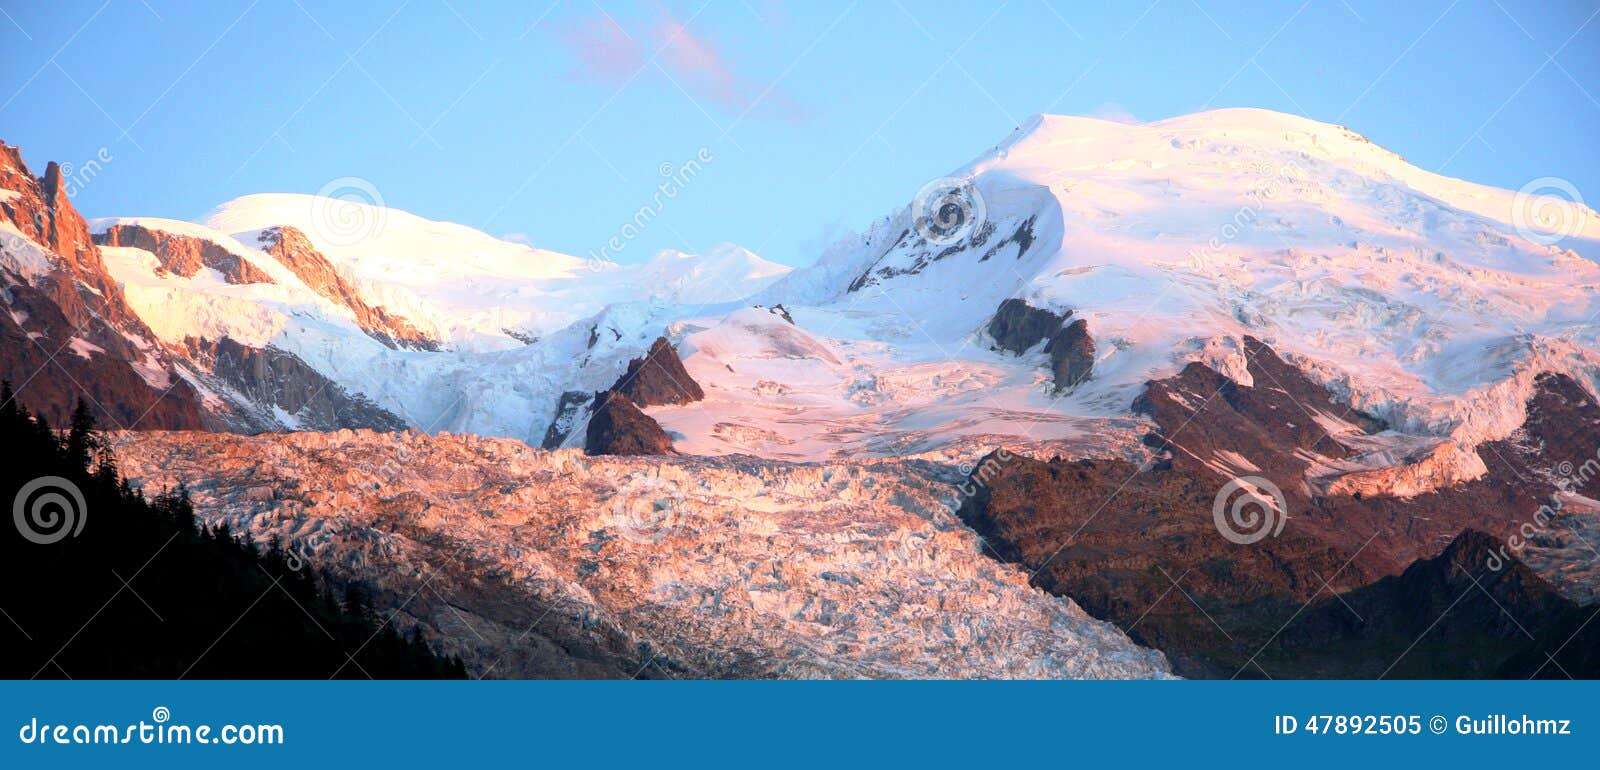 Stock Photo: MONT-BLANC - French Alps